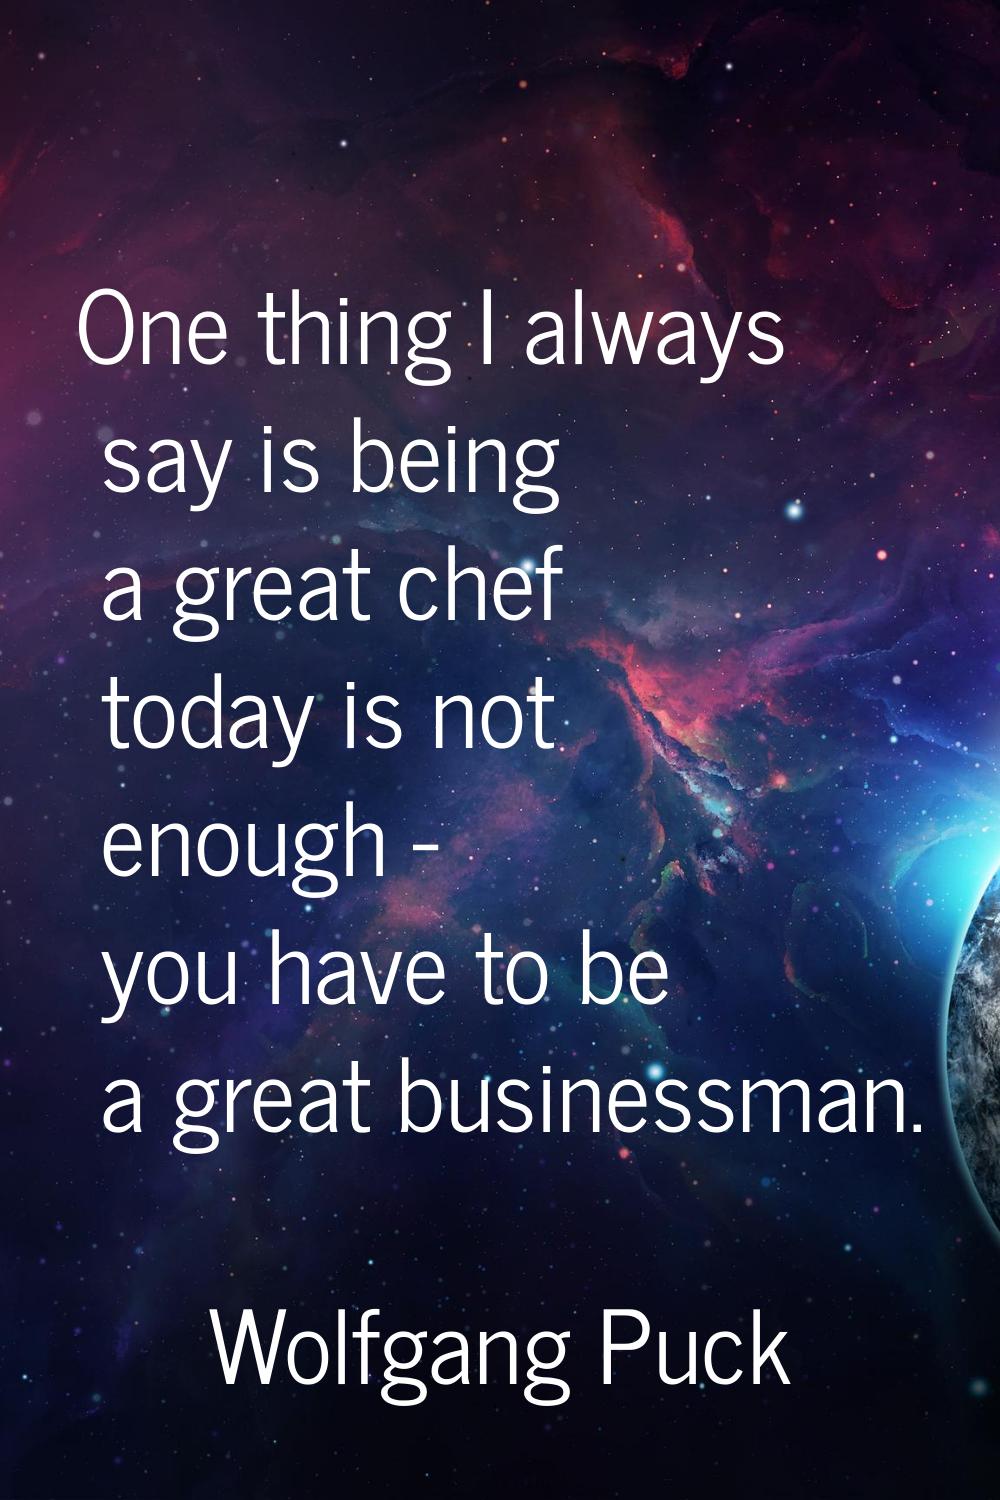 One thing I always say is being a great chef today is not enough - you have to be a great businessm